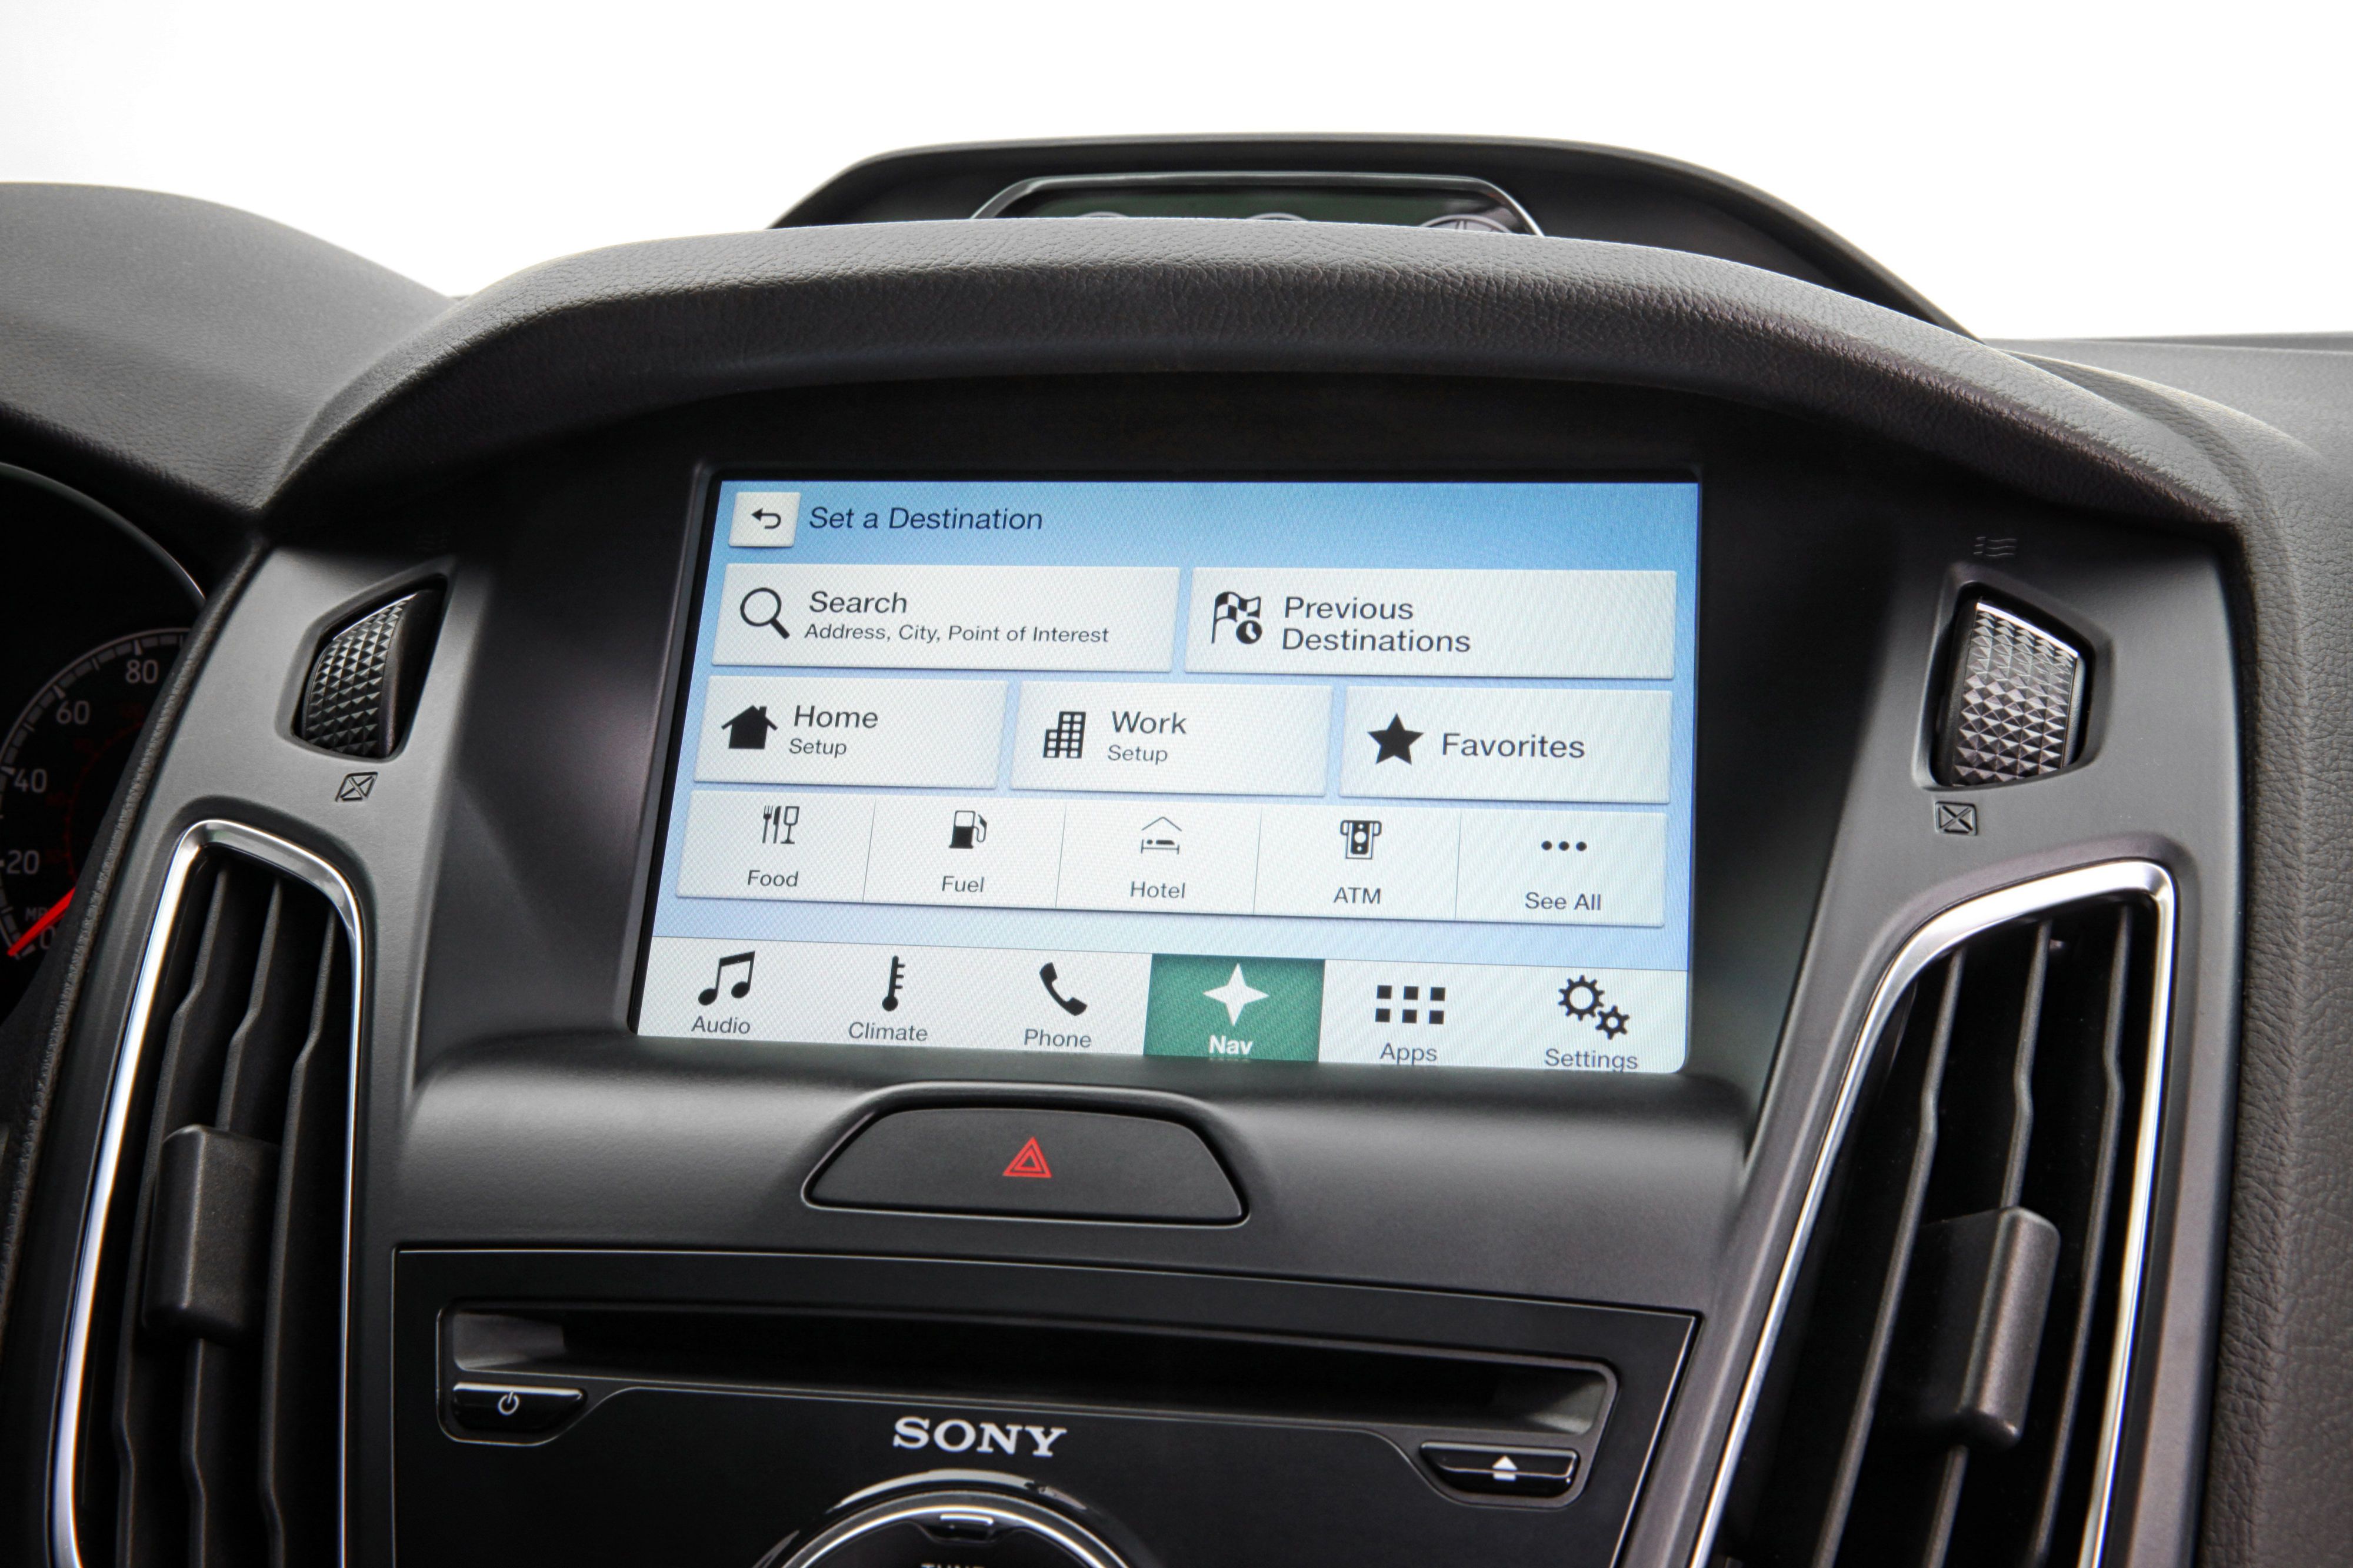 ford sync update